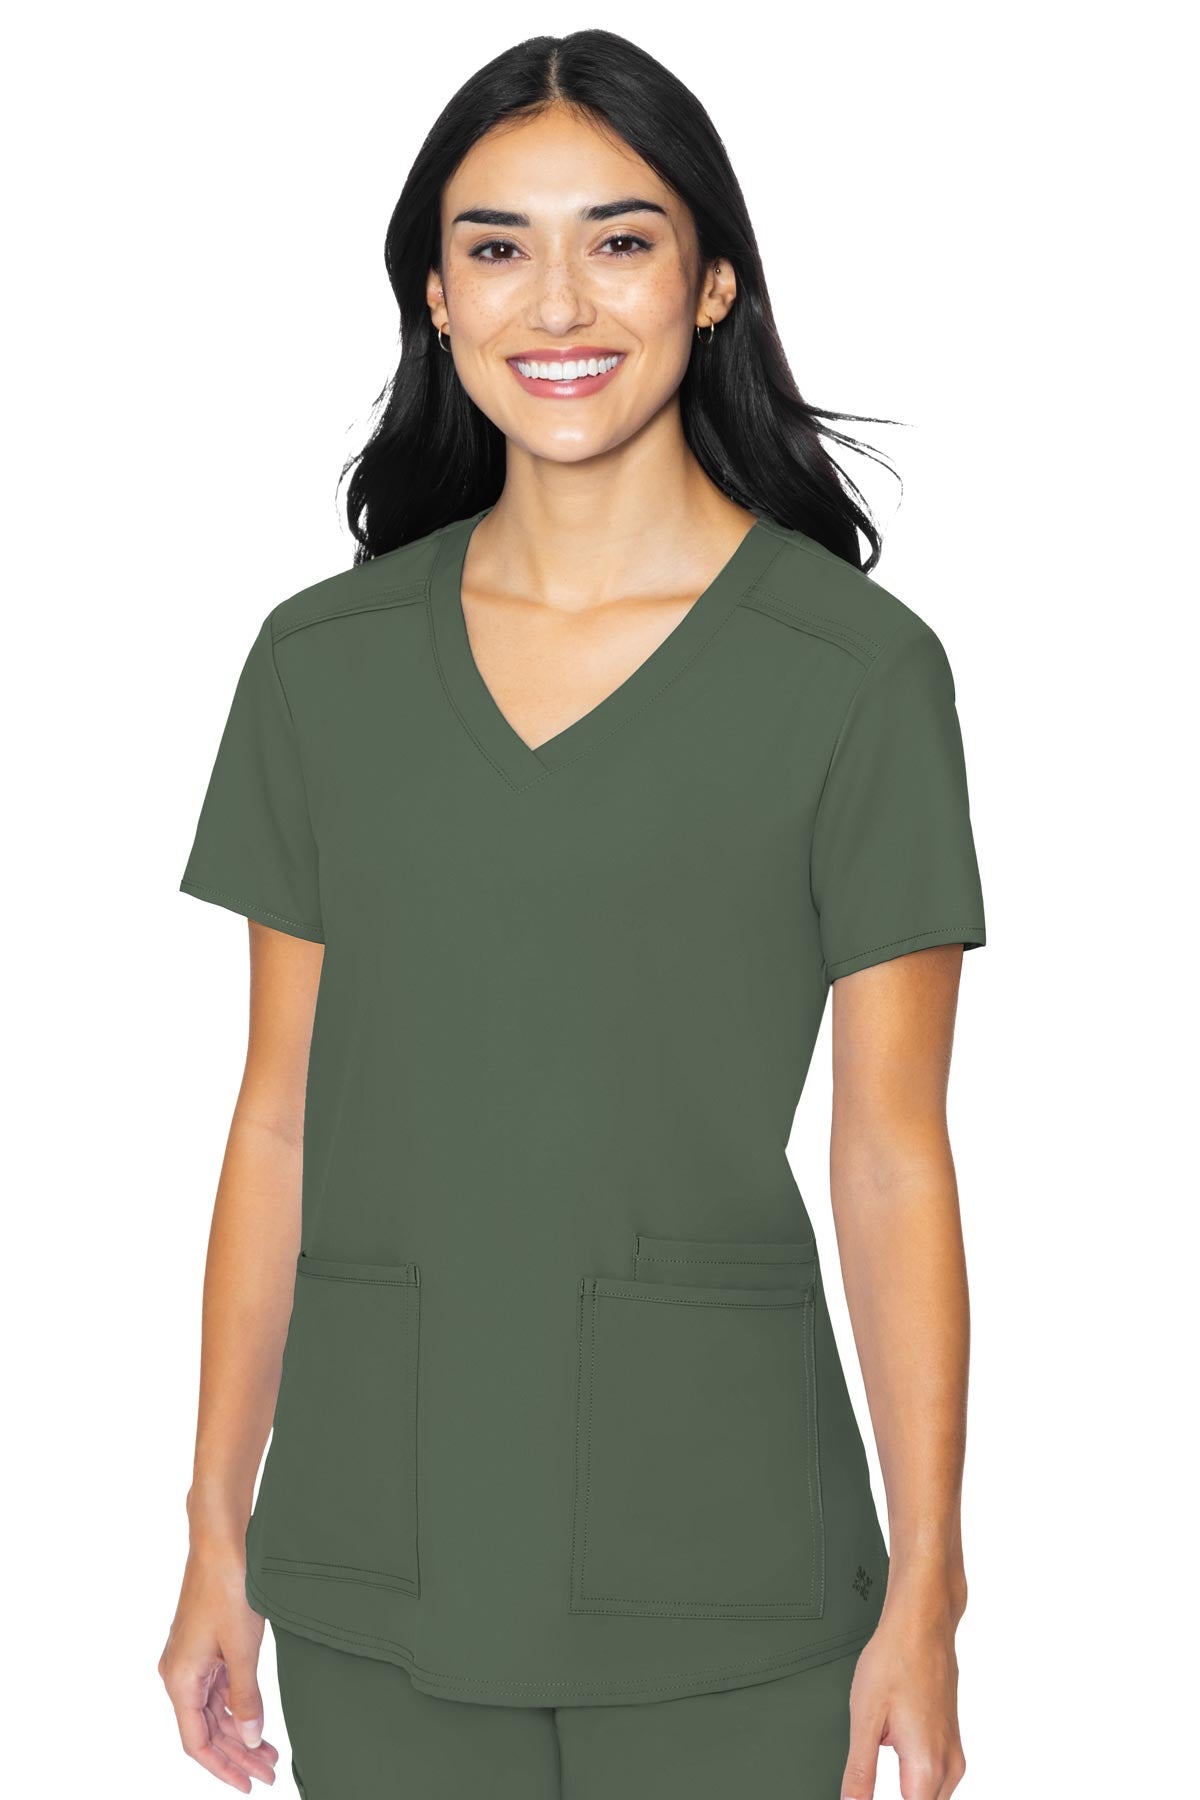 Med Couture Olive TOP